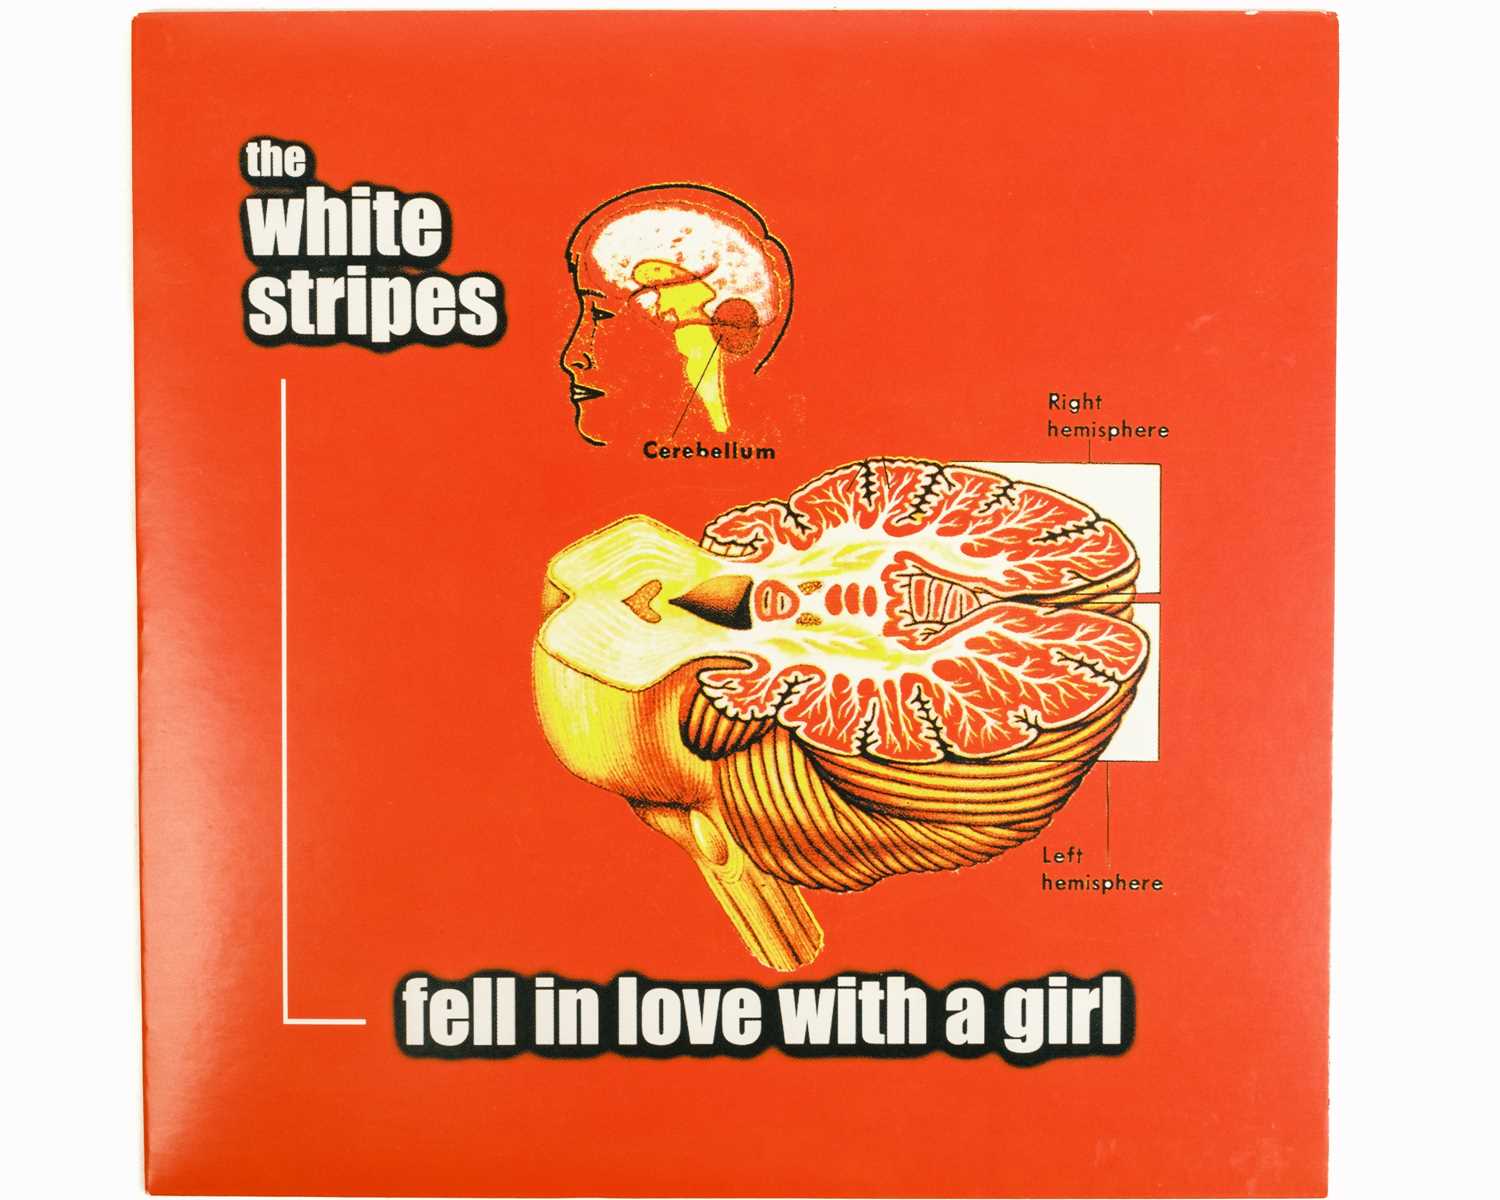 The White Stripes Singles collection. - Image 12 of 12